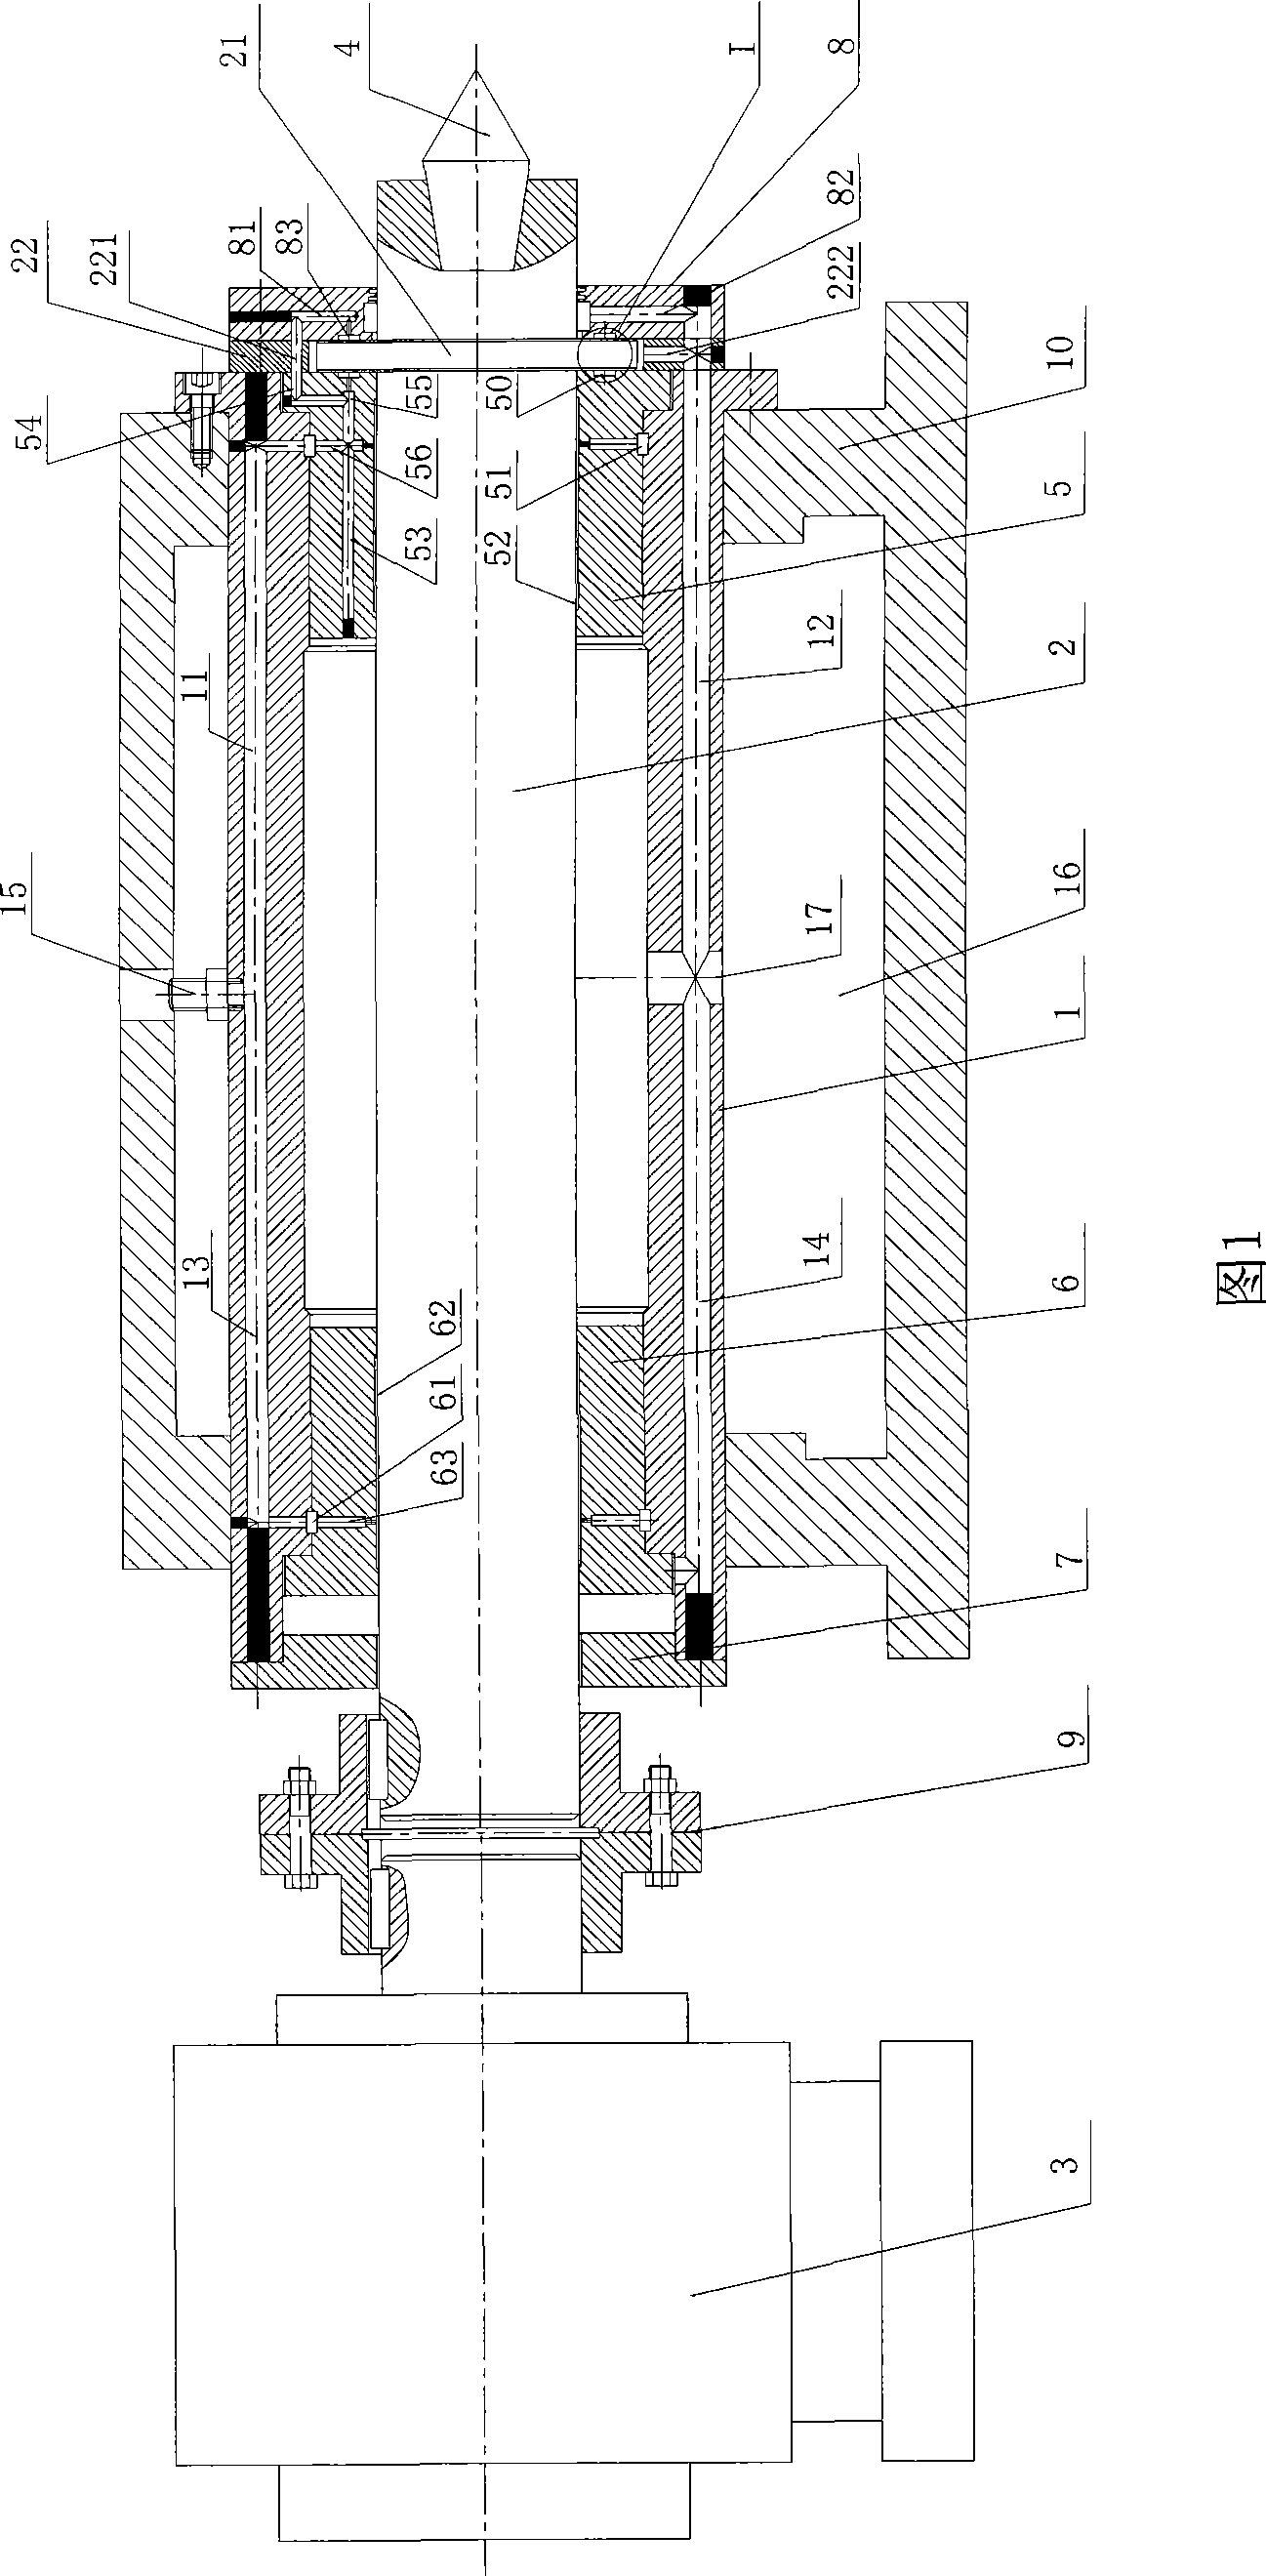 Grinding-bed static head rack capable of realizing accurate ultra micro-finishing